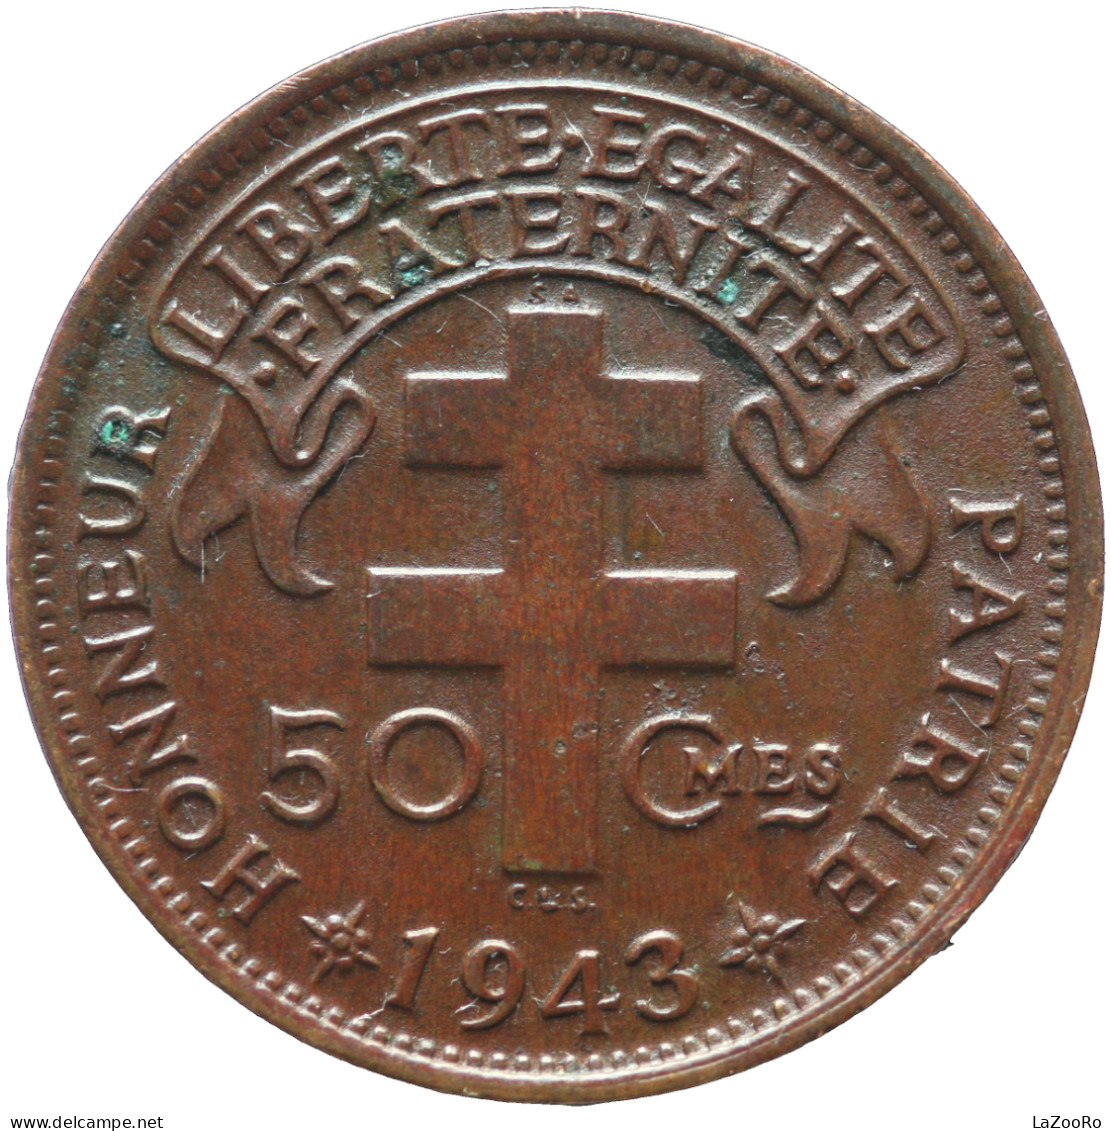 LaZooRo: French Equatorial Africa 50 Centimes 1943 SA UNC - Africa Equatoriale Francese